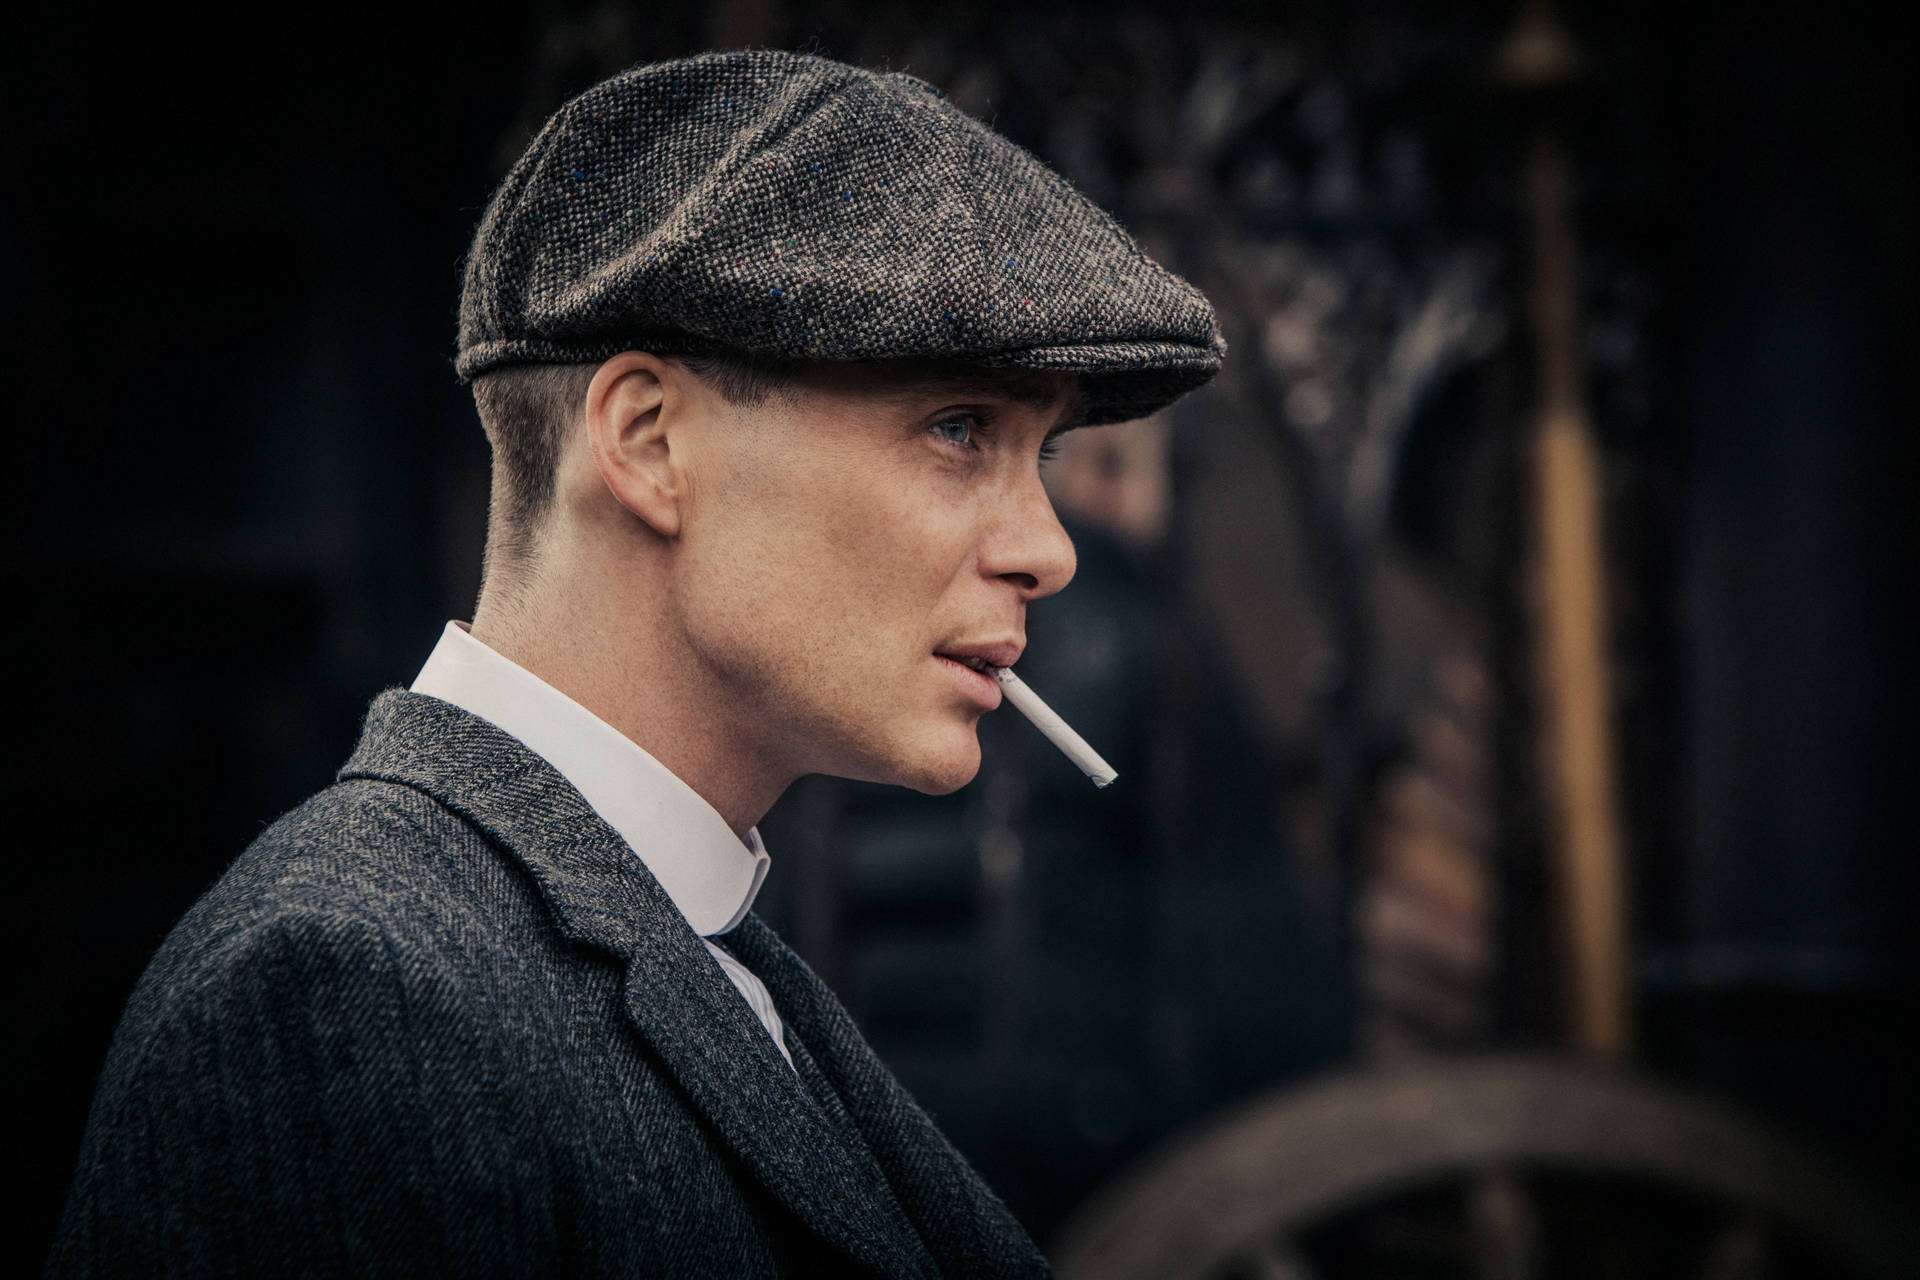 Free Thomas Shelby Wallpaper Downloads, [100+] Thomas Shelby Wallpapers for  FREE 